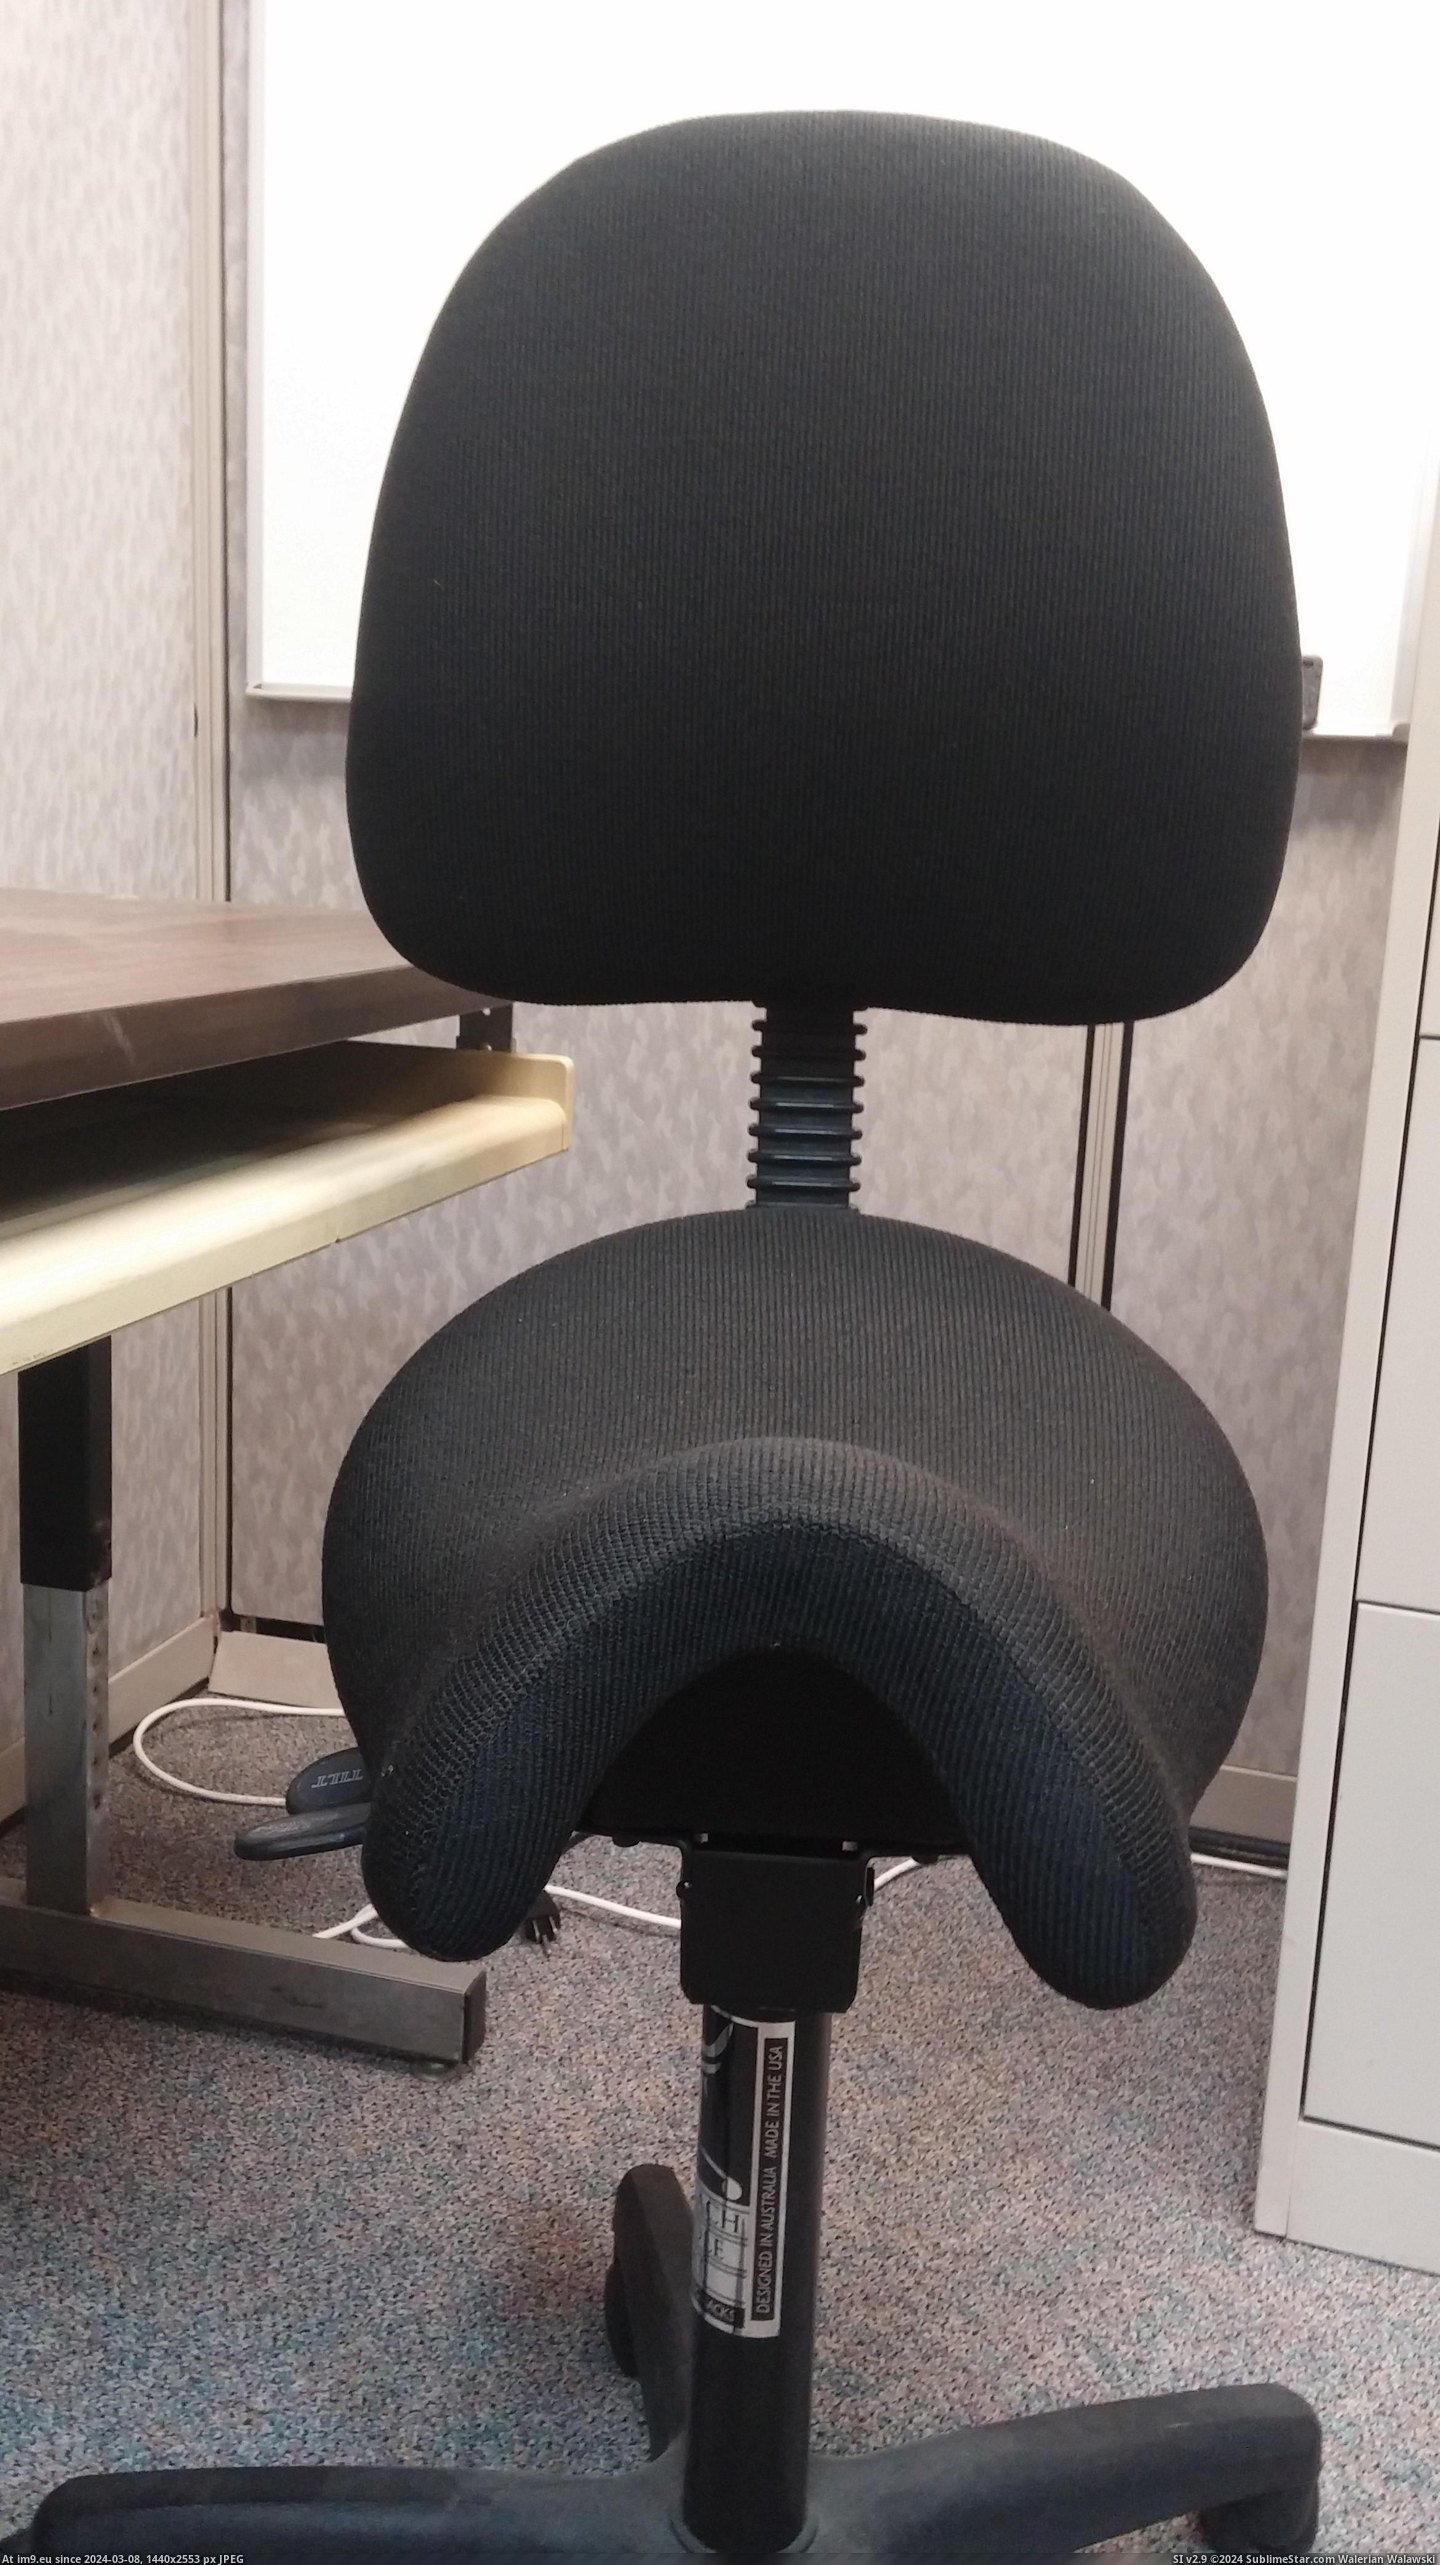 #Work #Office #Saddle #Weird #Chair [Mildlyinteresting] This weird office chair saddle I found at my work. Pic. (Bild von album My r/MILDLYINTERESTING favs))